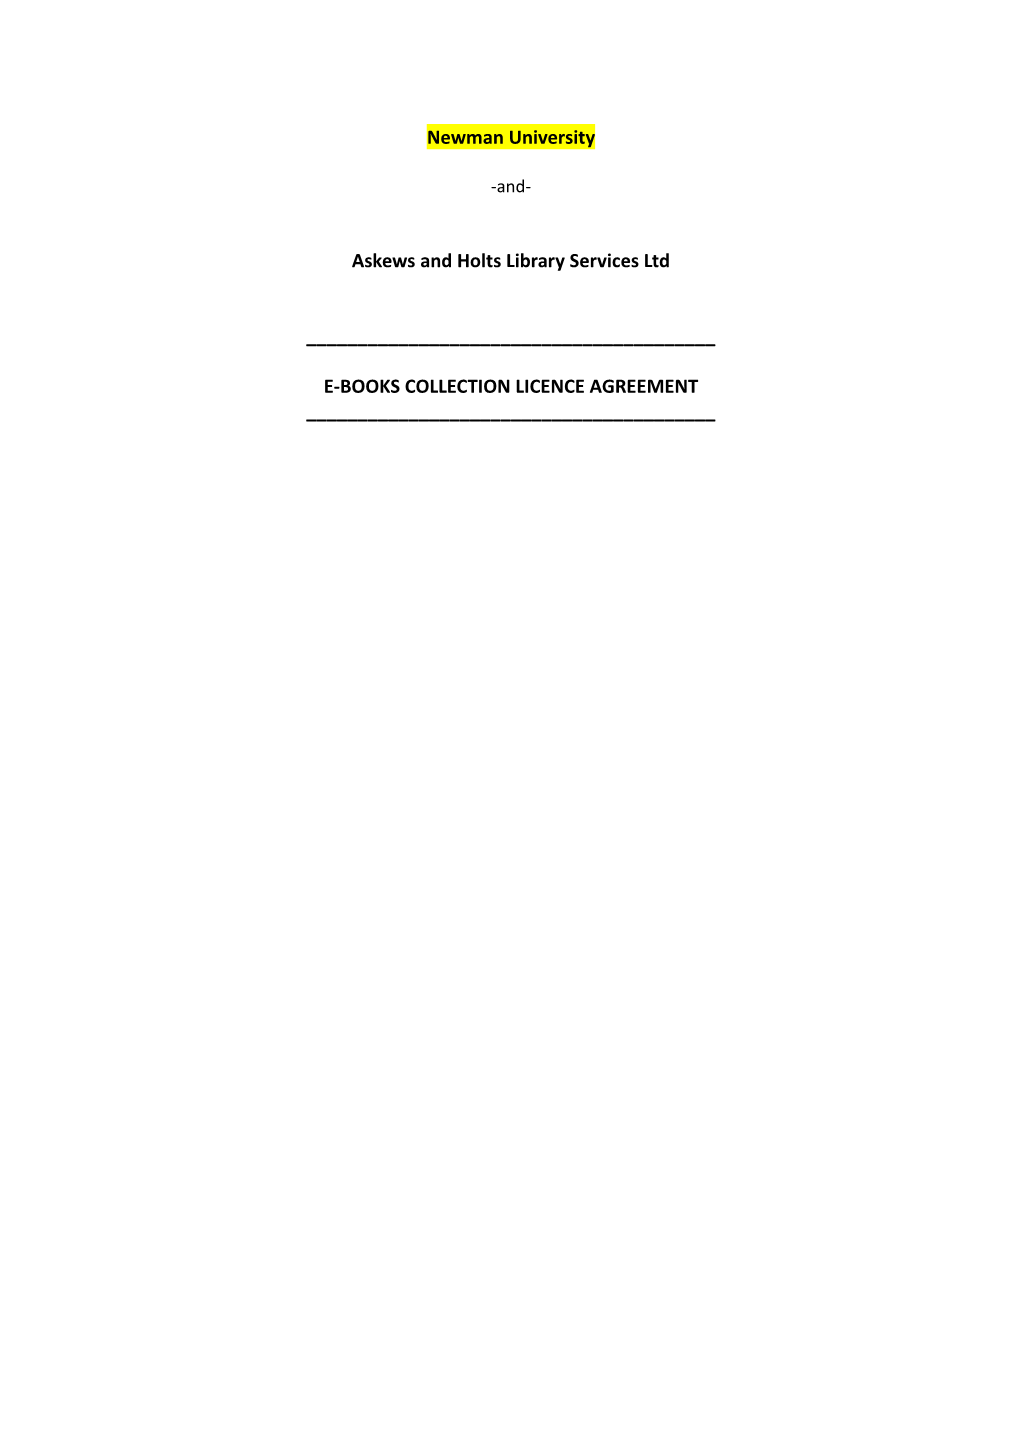 Askews and Holts Library Services Ltd